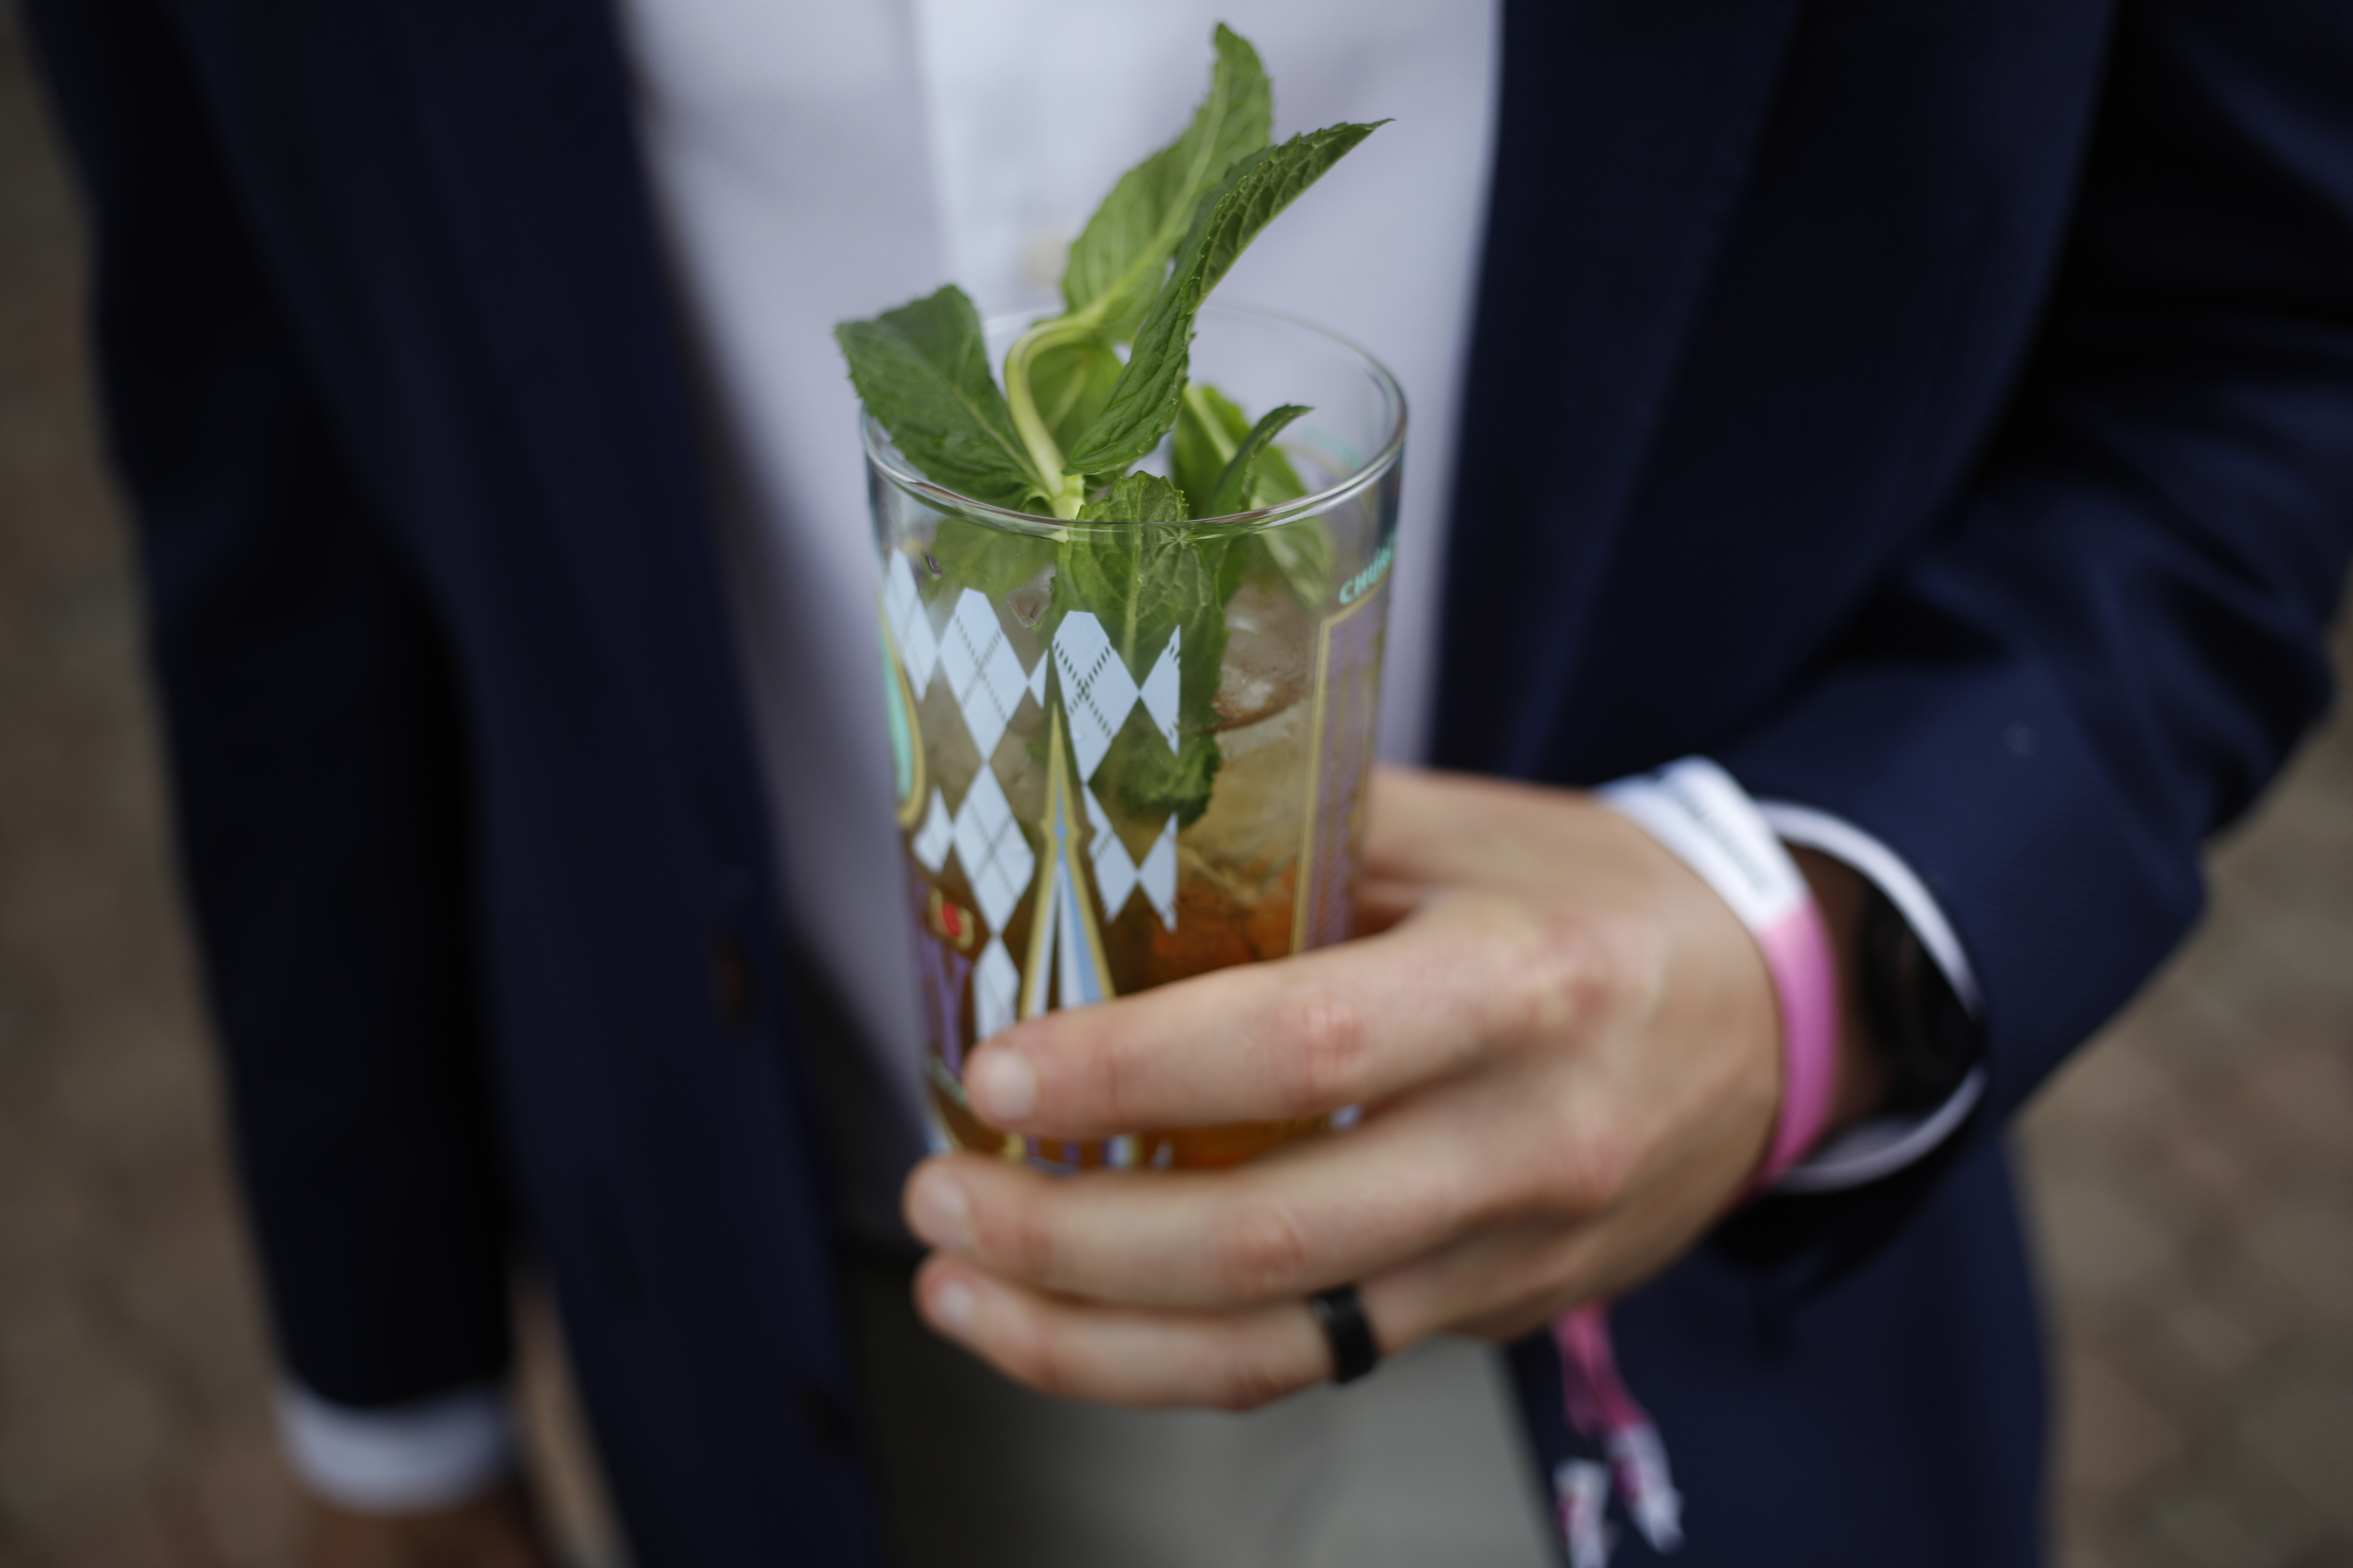 Here's how you can make a yummy mint julep, a Kentucky Derby
tradition, in the comfort of home